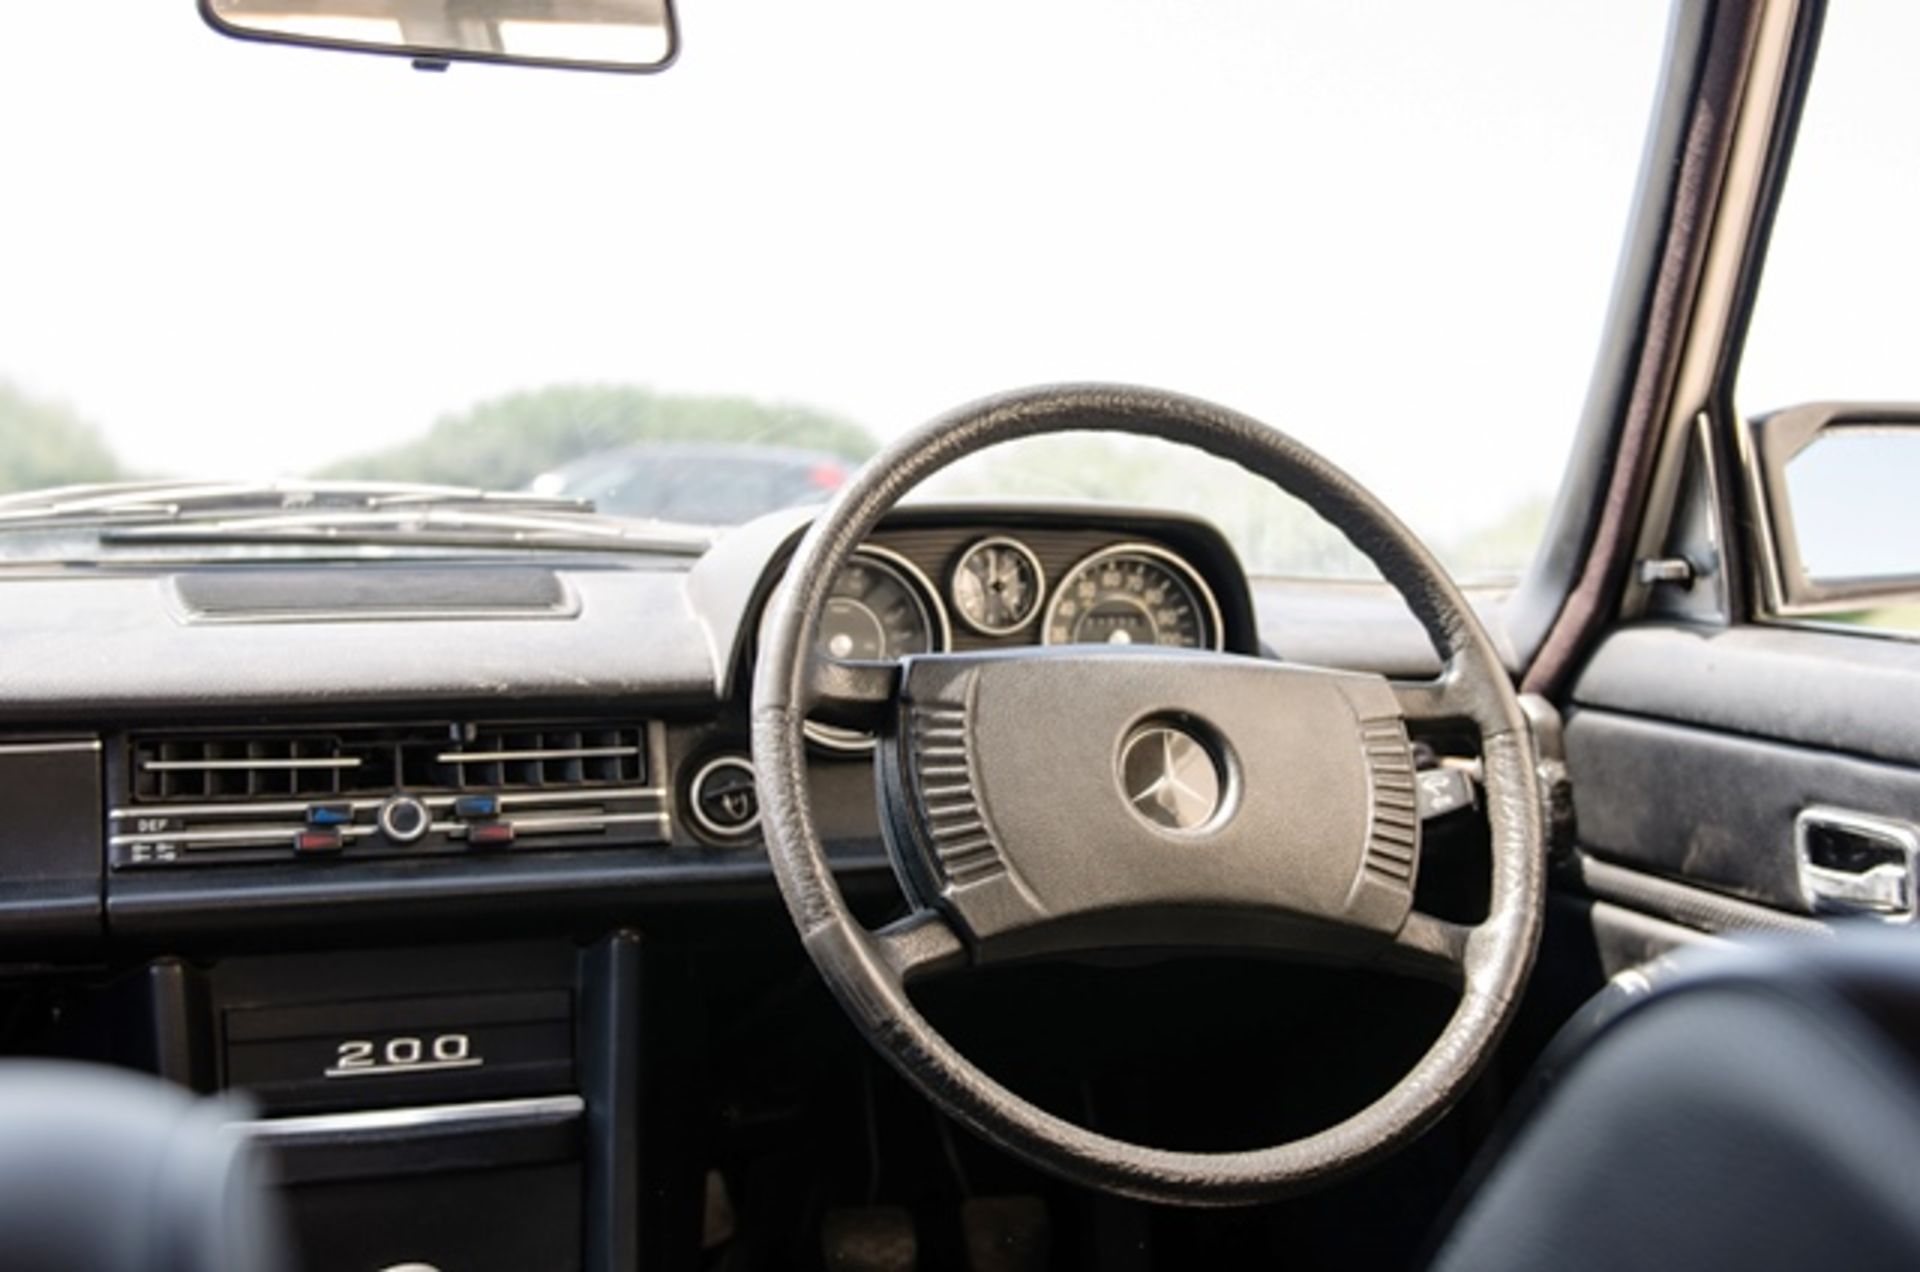 WITHDRAWN - 1975 Mercedes-Benz 200 Saloon - Image 5 of 8